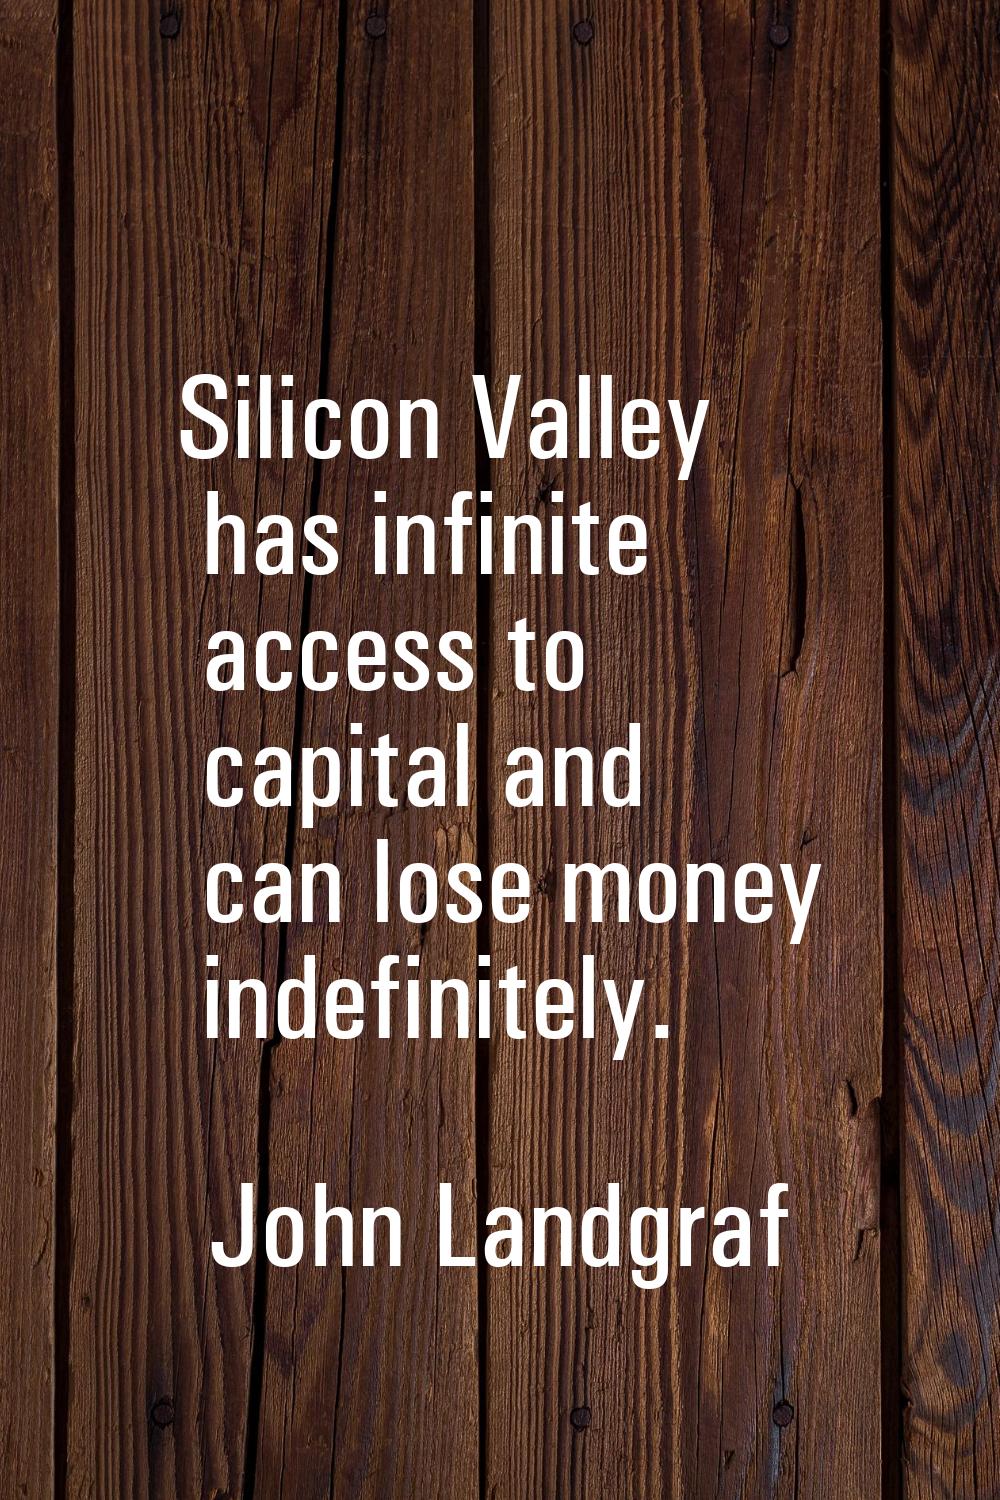 Silicon Valley has infinite access to capital and can lose money indefinitely.